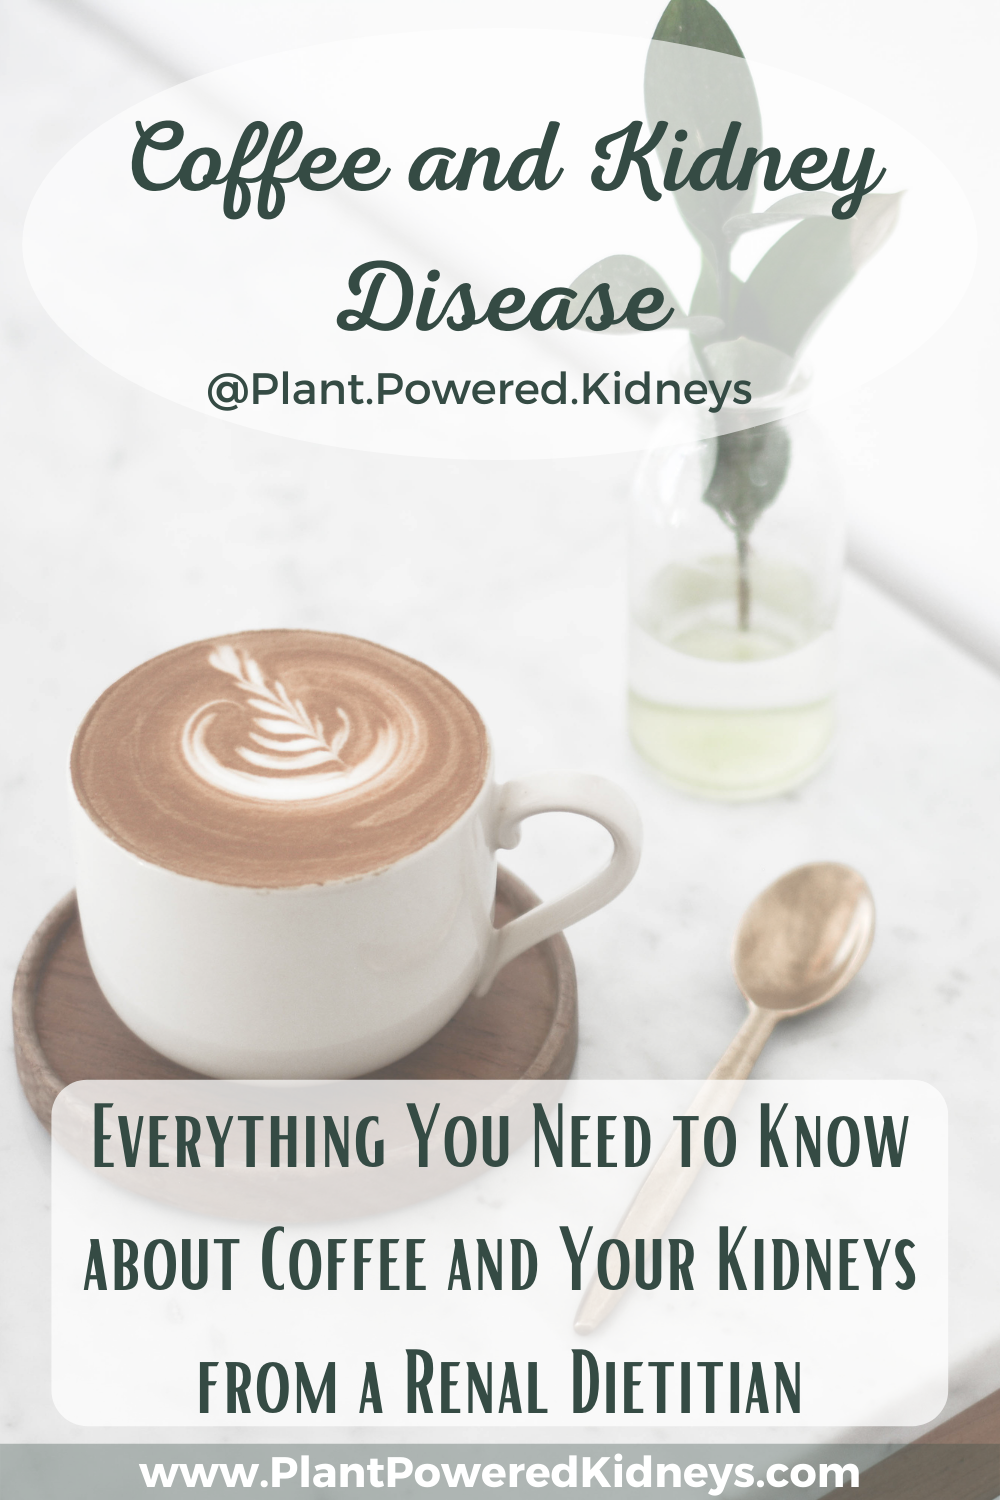 Coffee for Kidney Disease: The Pros and Cons